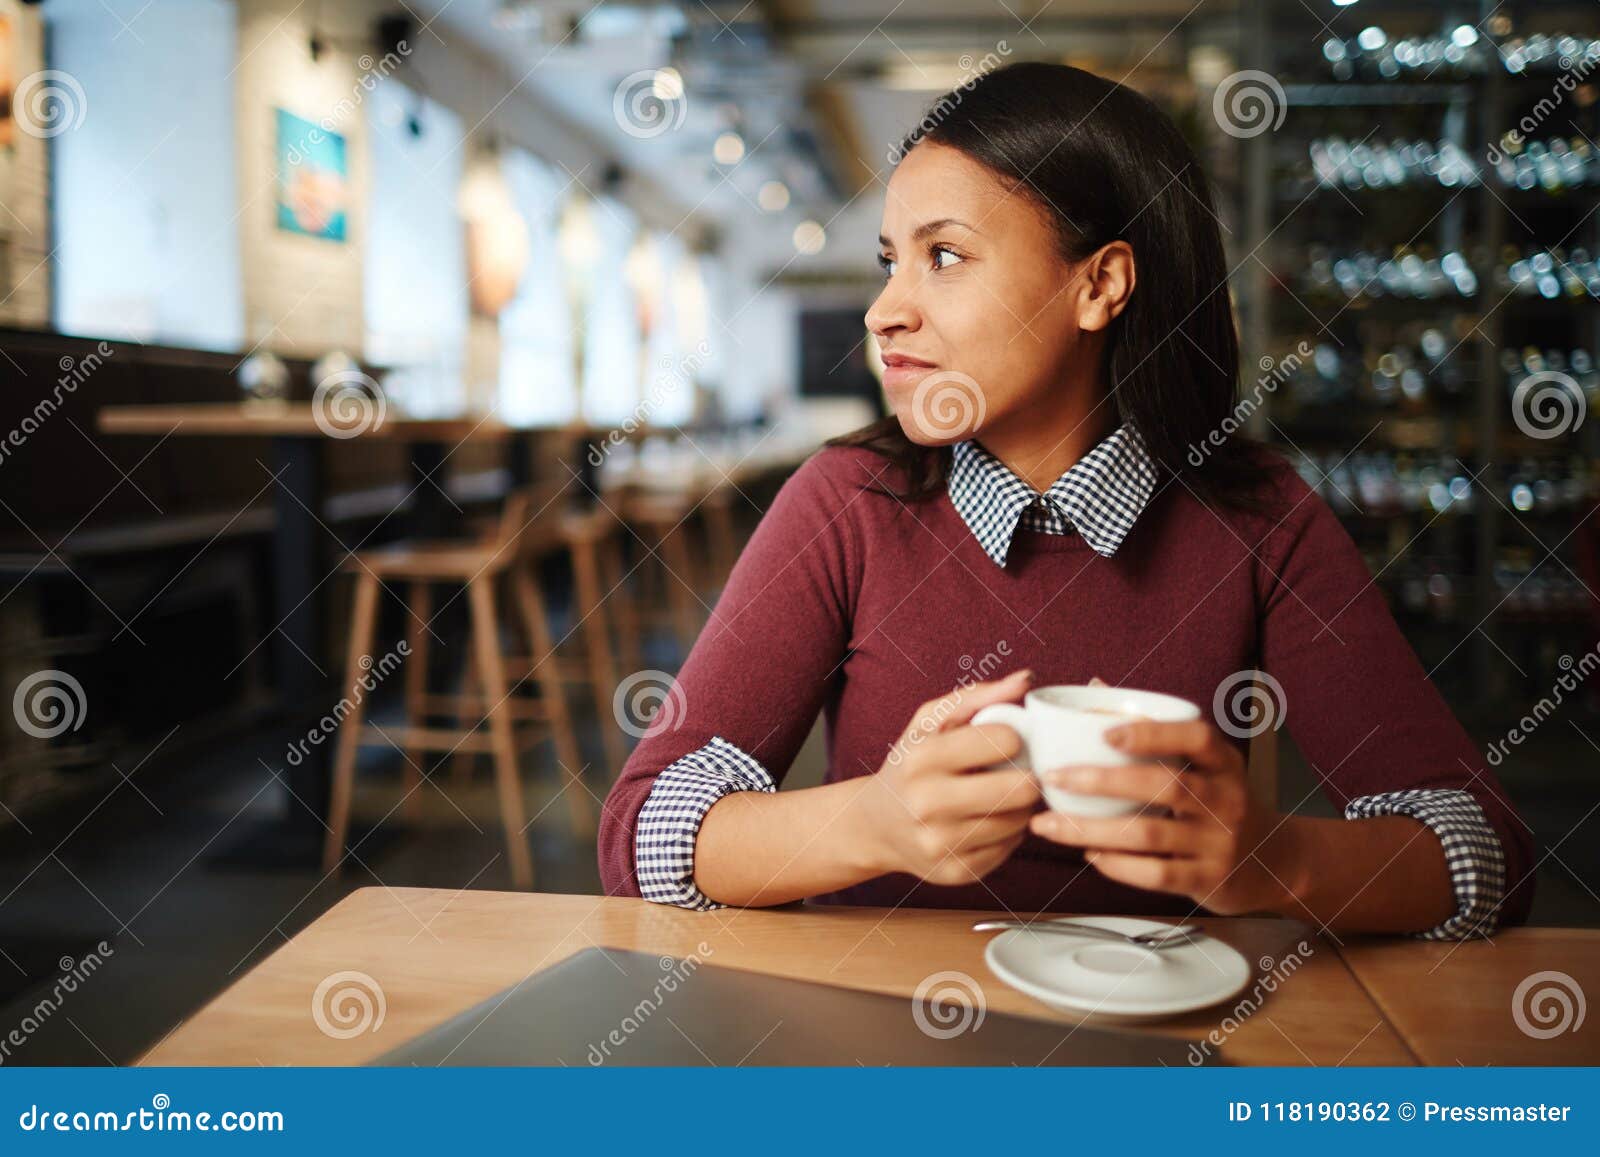 Thoughtful Woman With Coffee Stock Photo - Image of drink, cafe: 118190362
